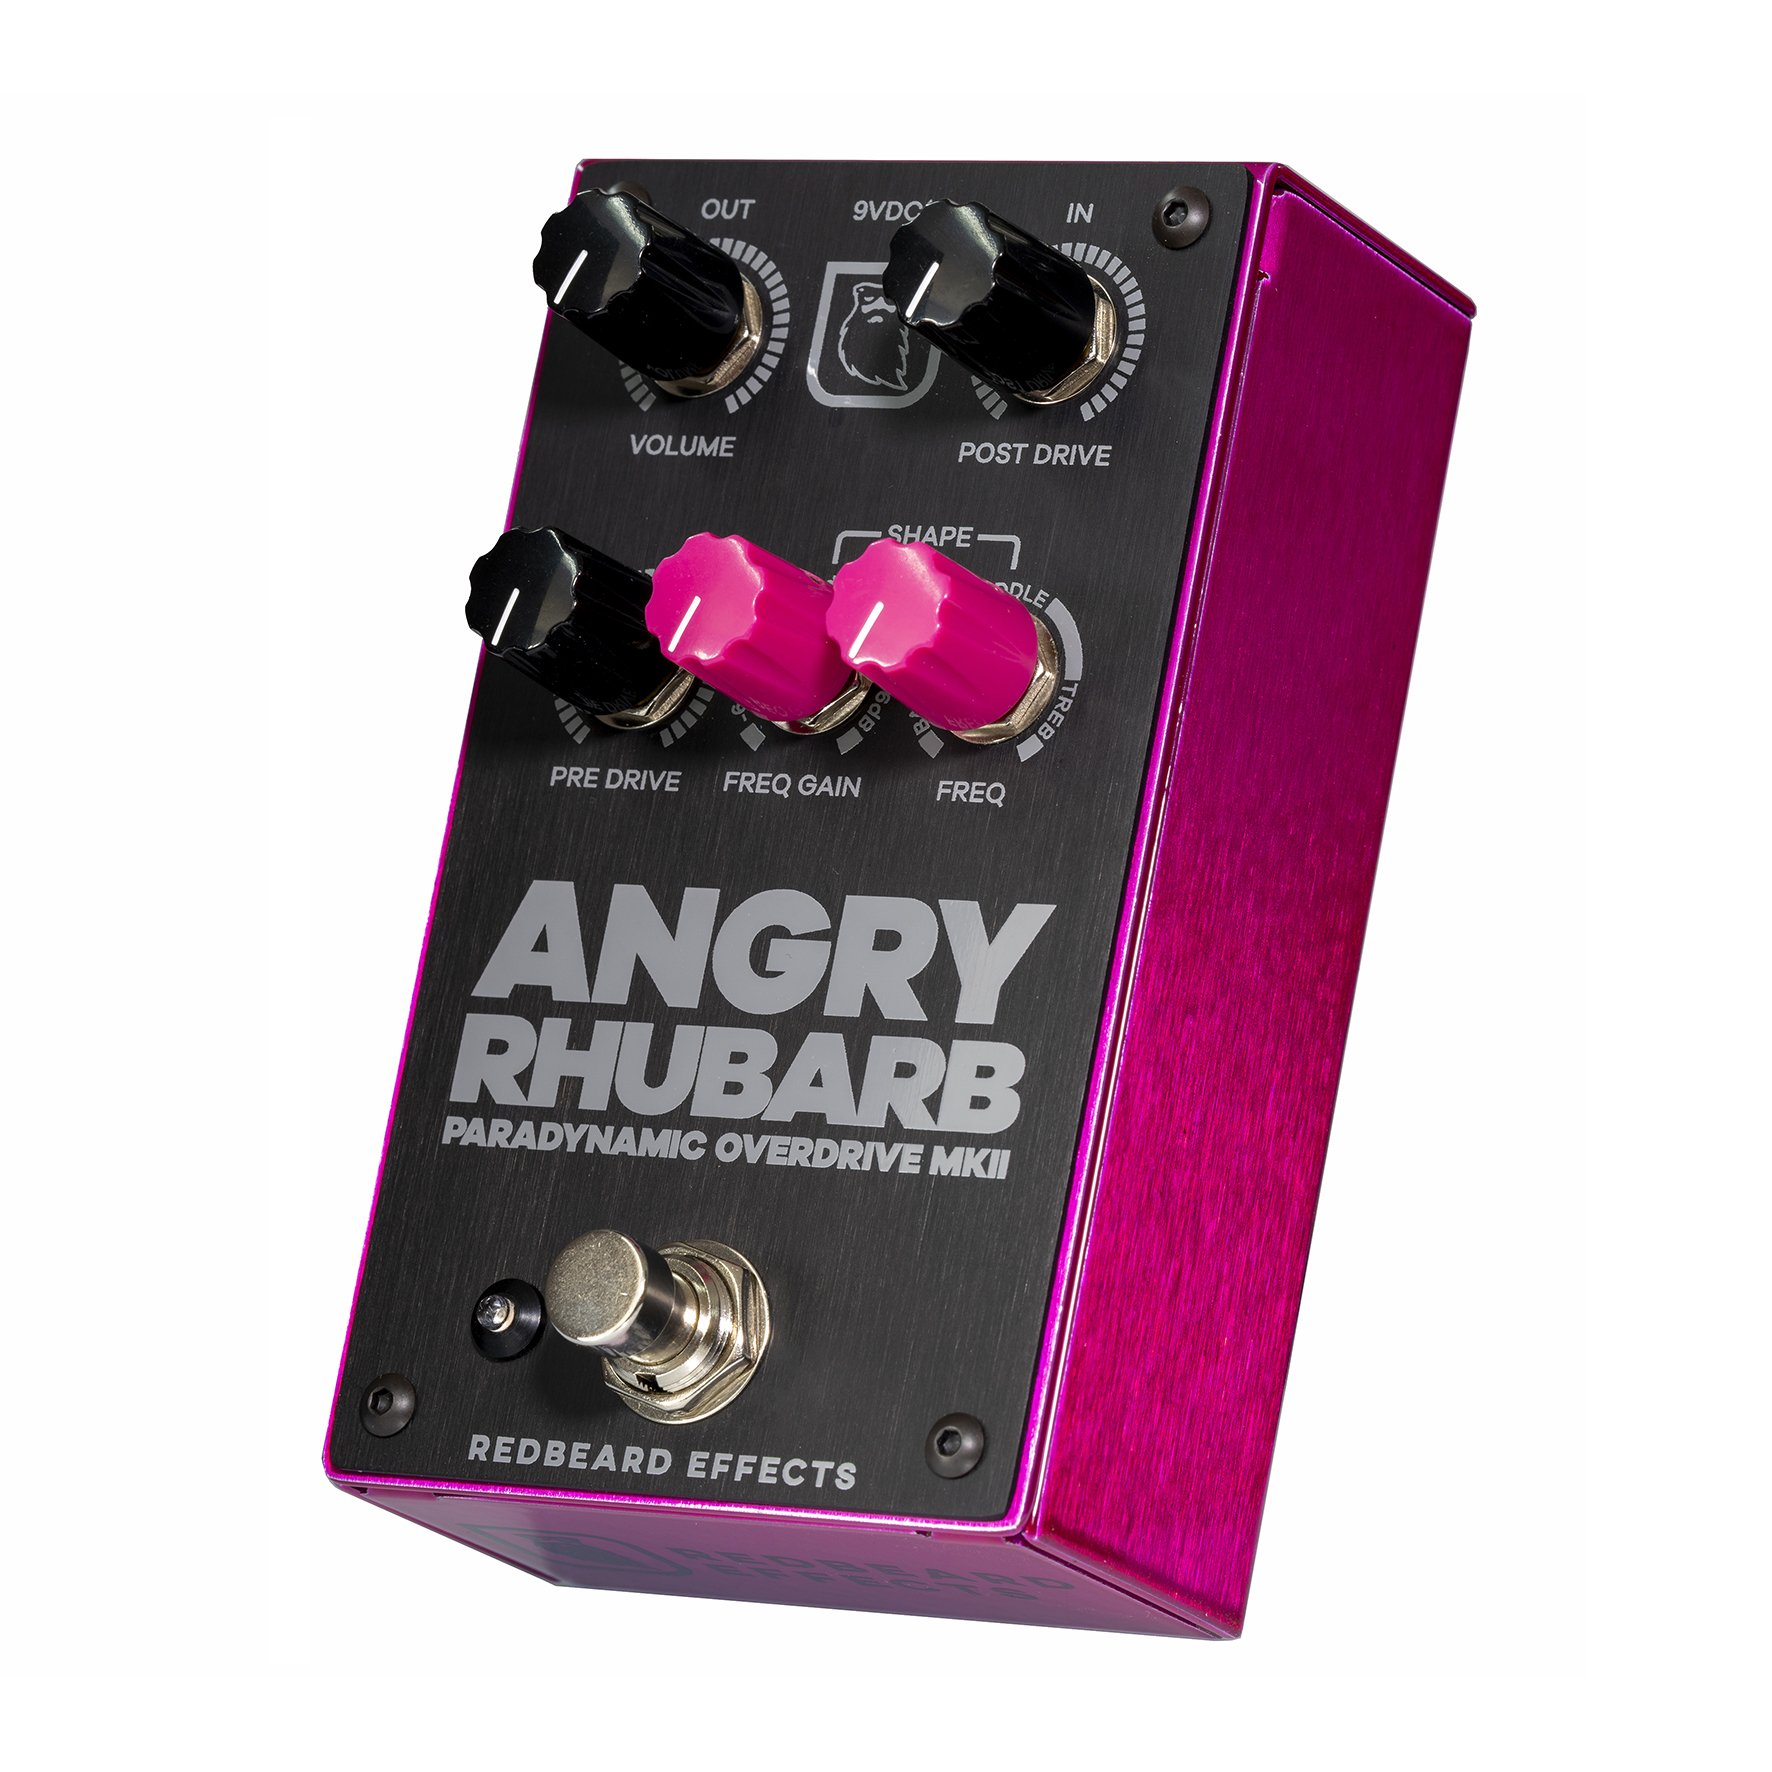 Redbeard Effects Angry Rhubarb Paradynamic Overdrive Mkii - Pedal overdrive / distorsión / fuzz - Variation 1